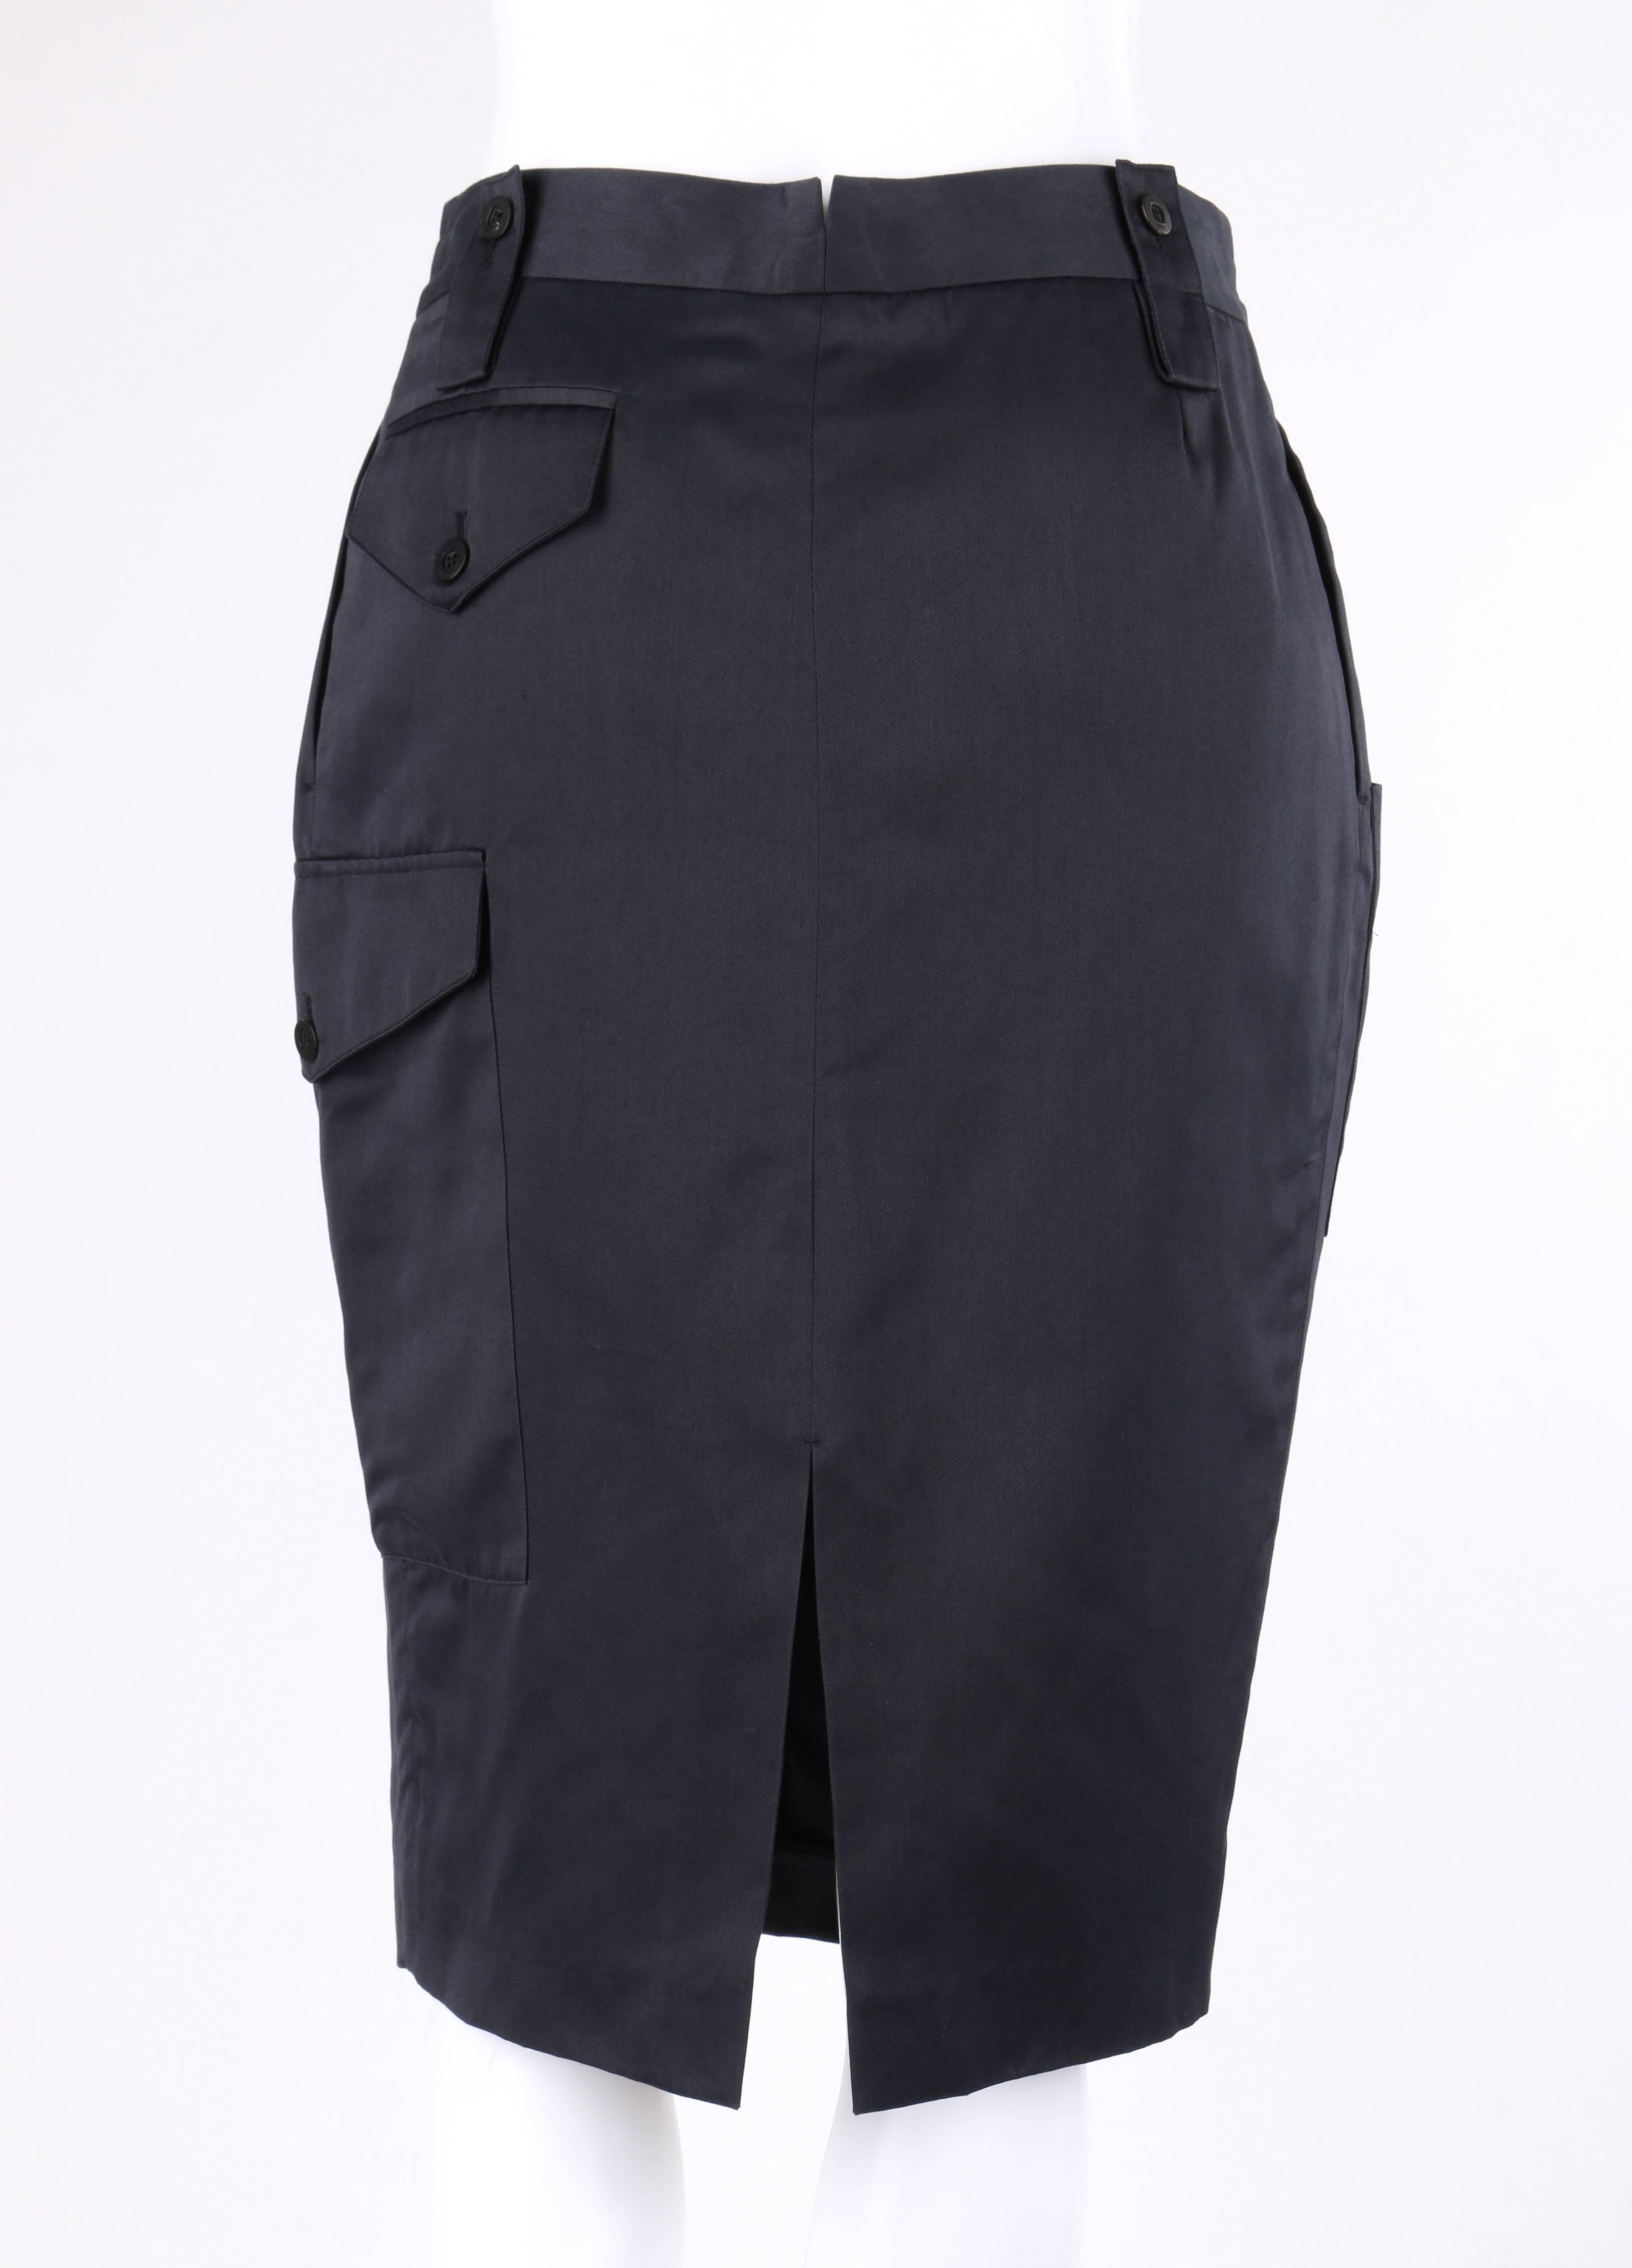 pencil skirt with pockets